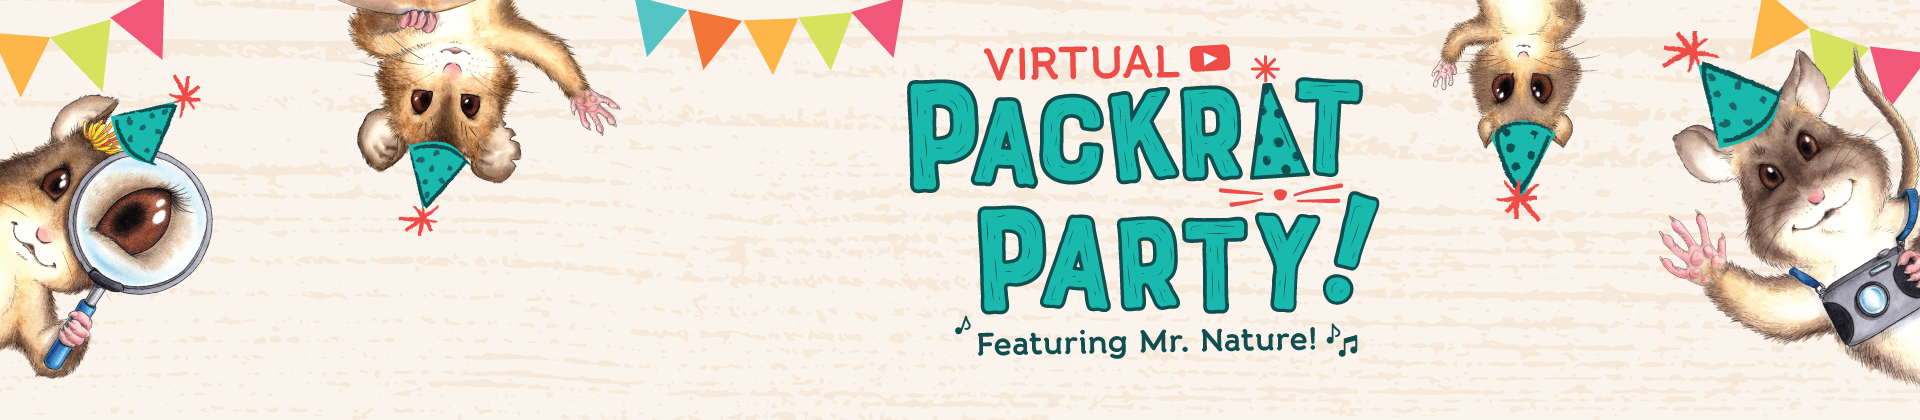 Packratparty Page header image